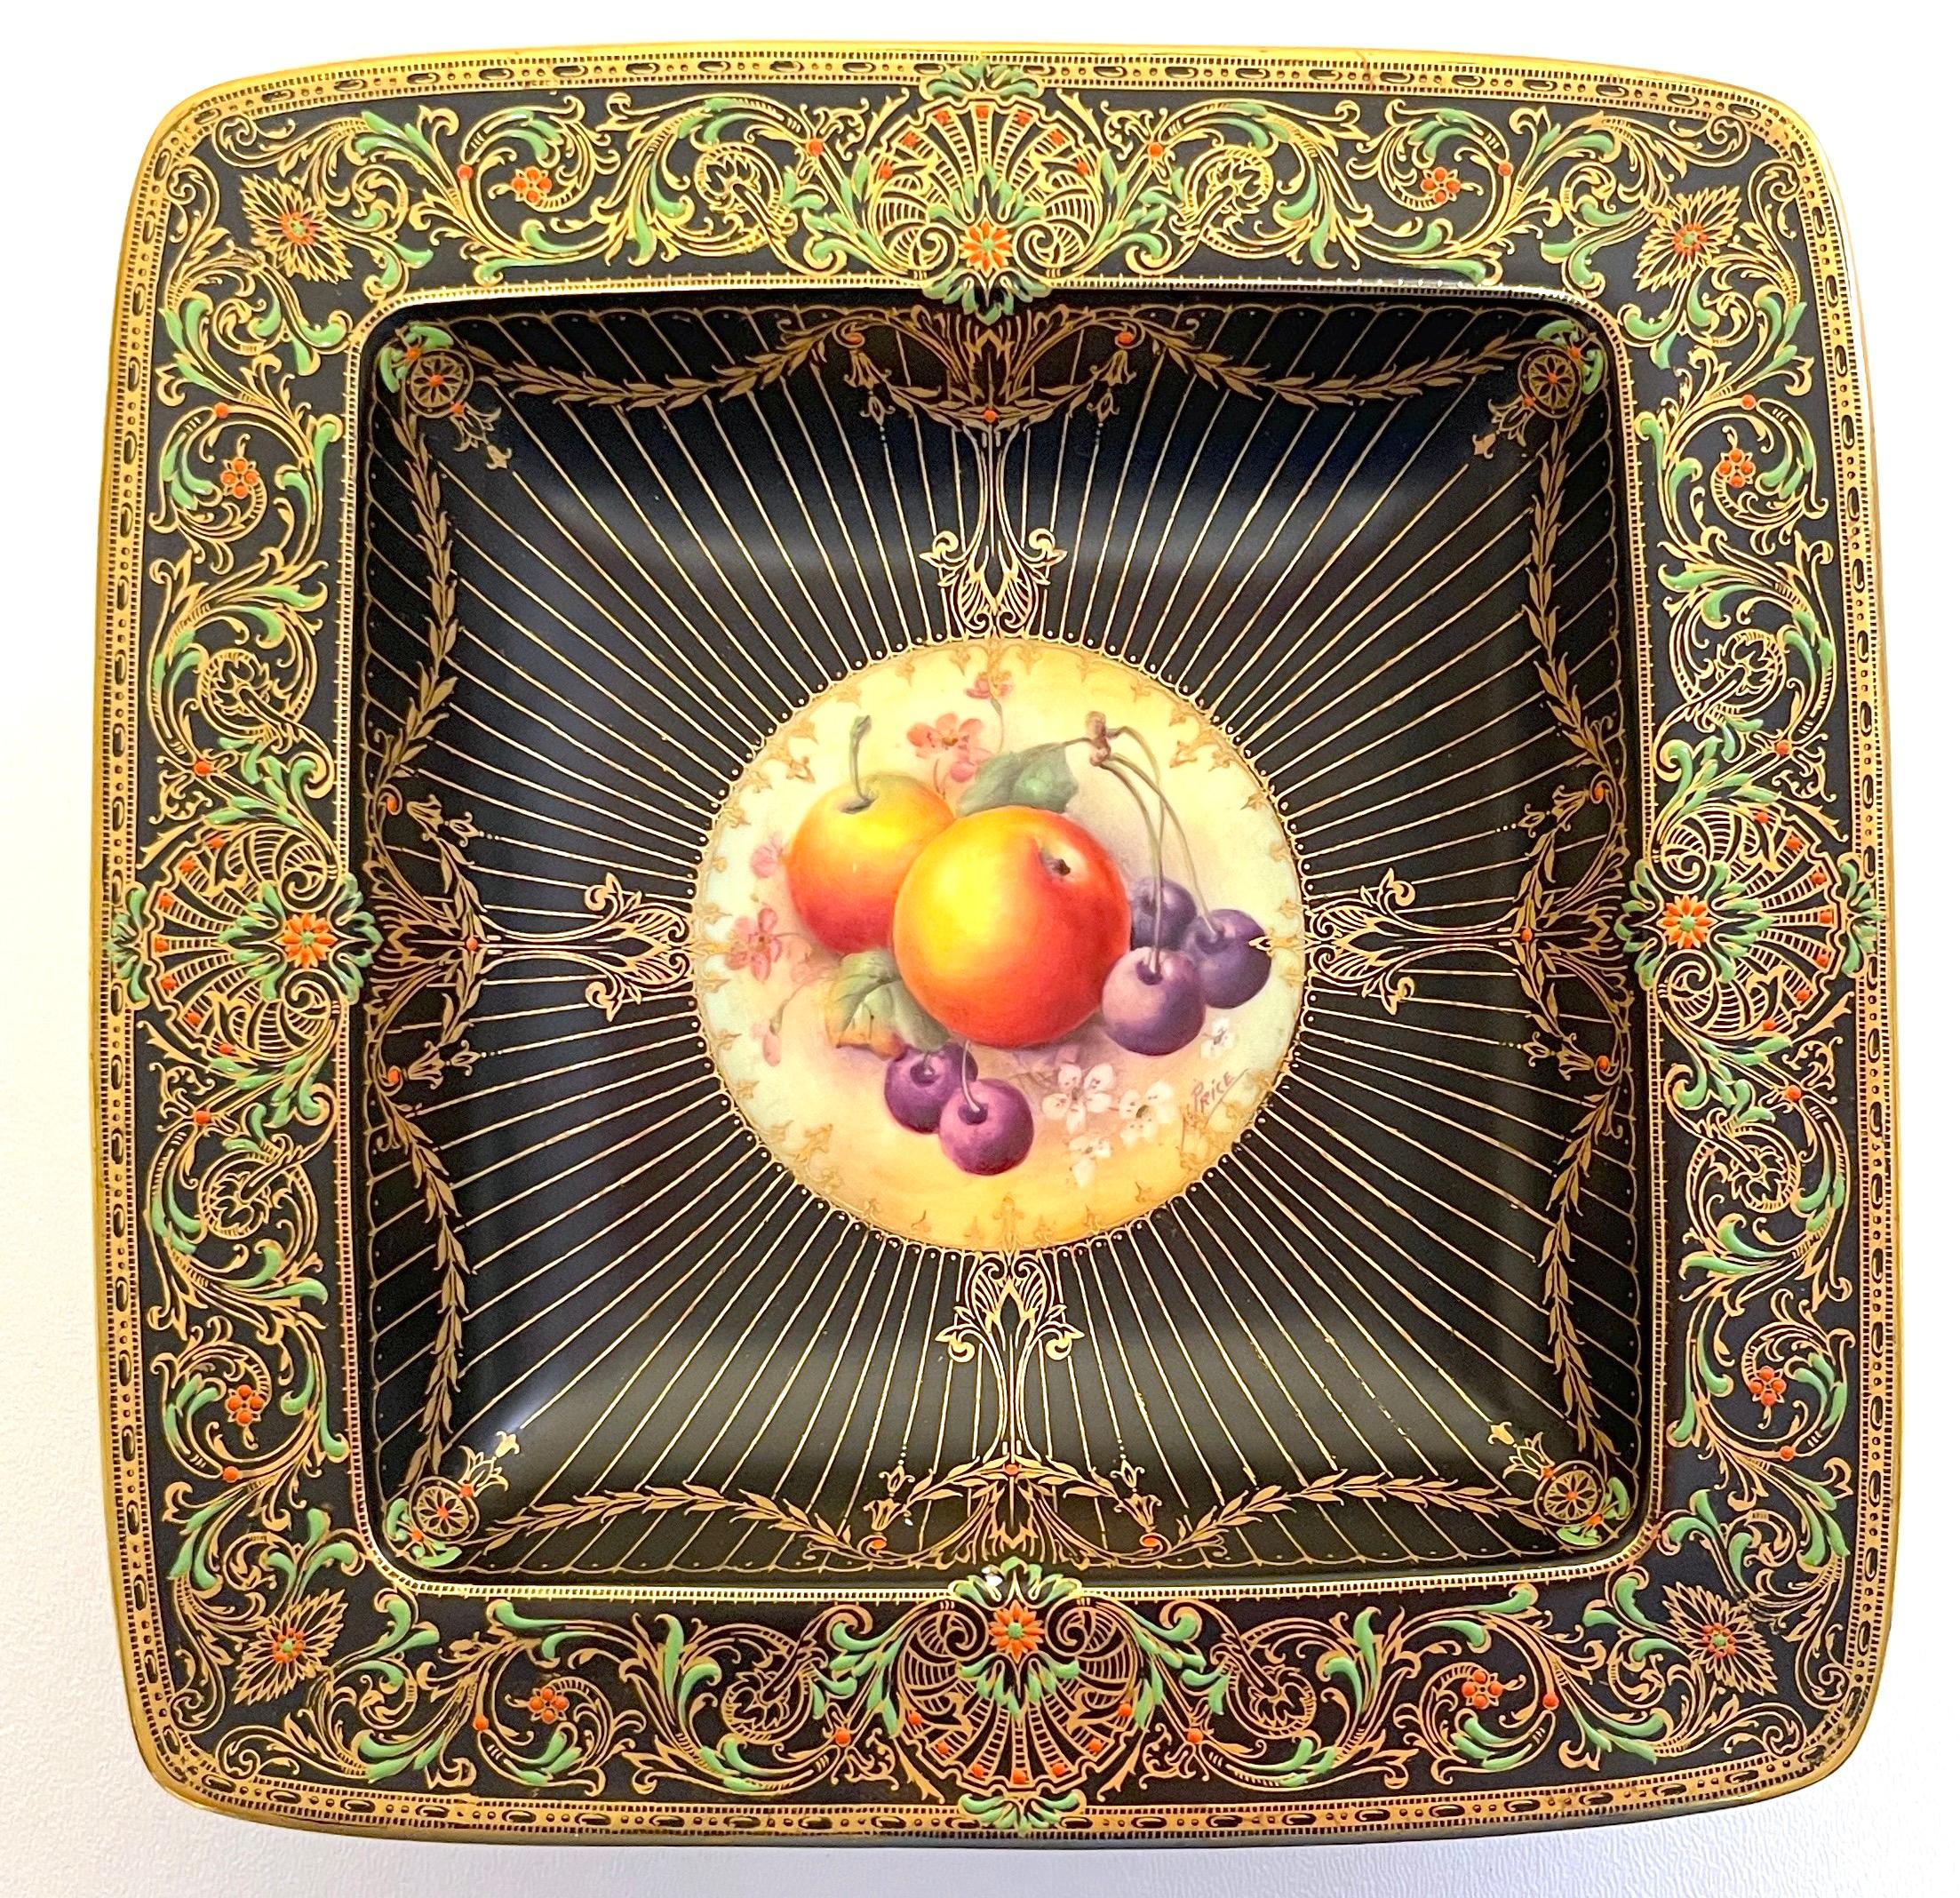 Art Deco Royal Worcester Painted Fruit cabinet bowl by Horace Price
England, Date marked for 1933 =Three circles and one dot and Made in England

This fine example of Royal Worcester porcelain with an atypical black background, elaborate colorful